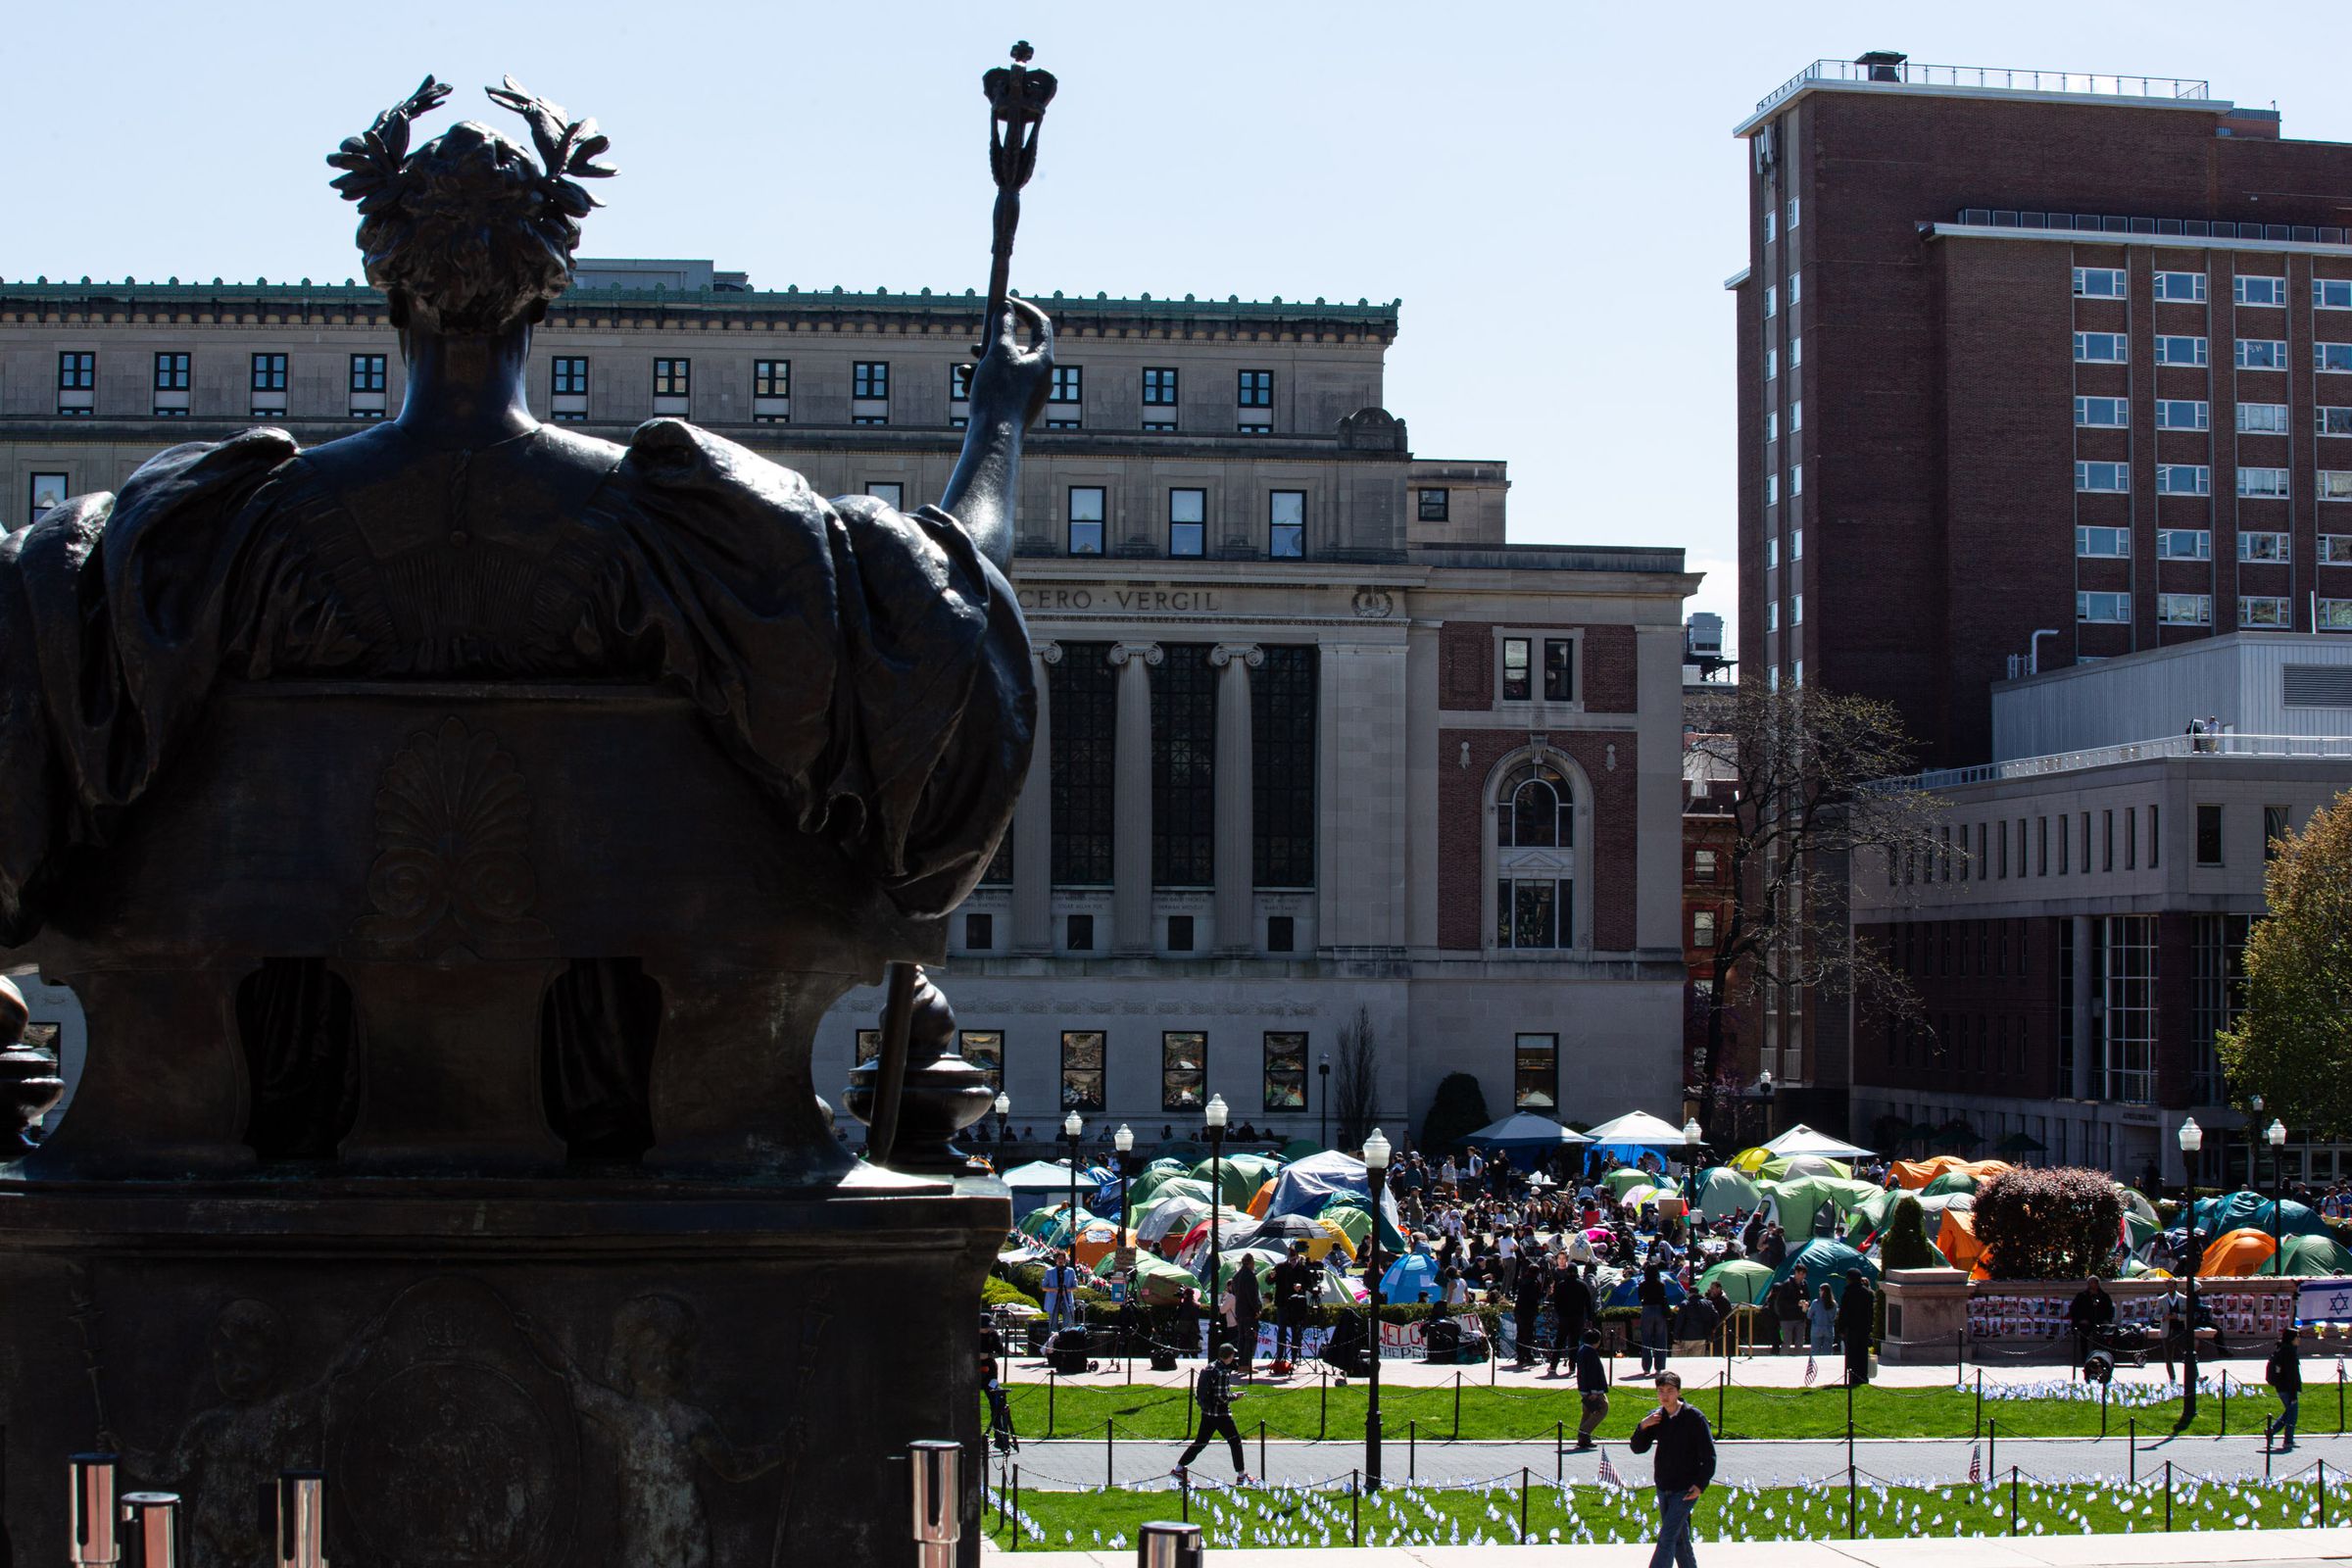 A photo of the student encampment on the quad of Columbia University, protesting the university’s ties to Israel.